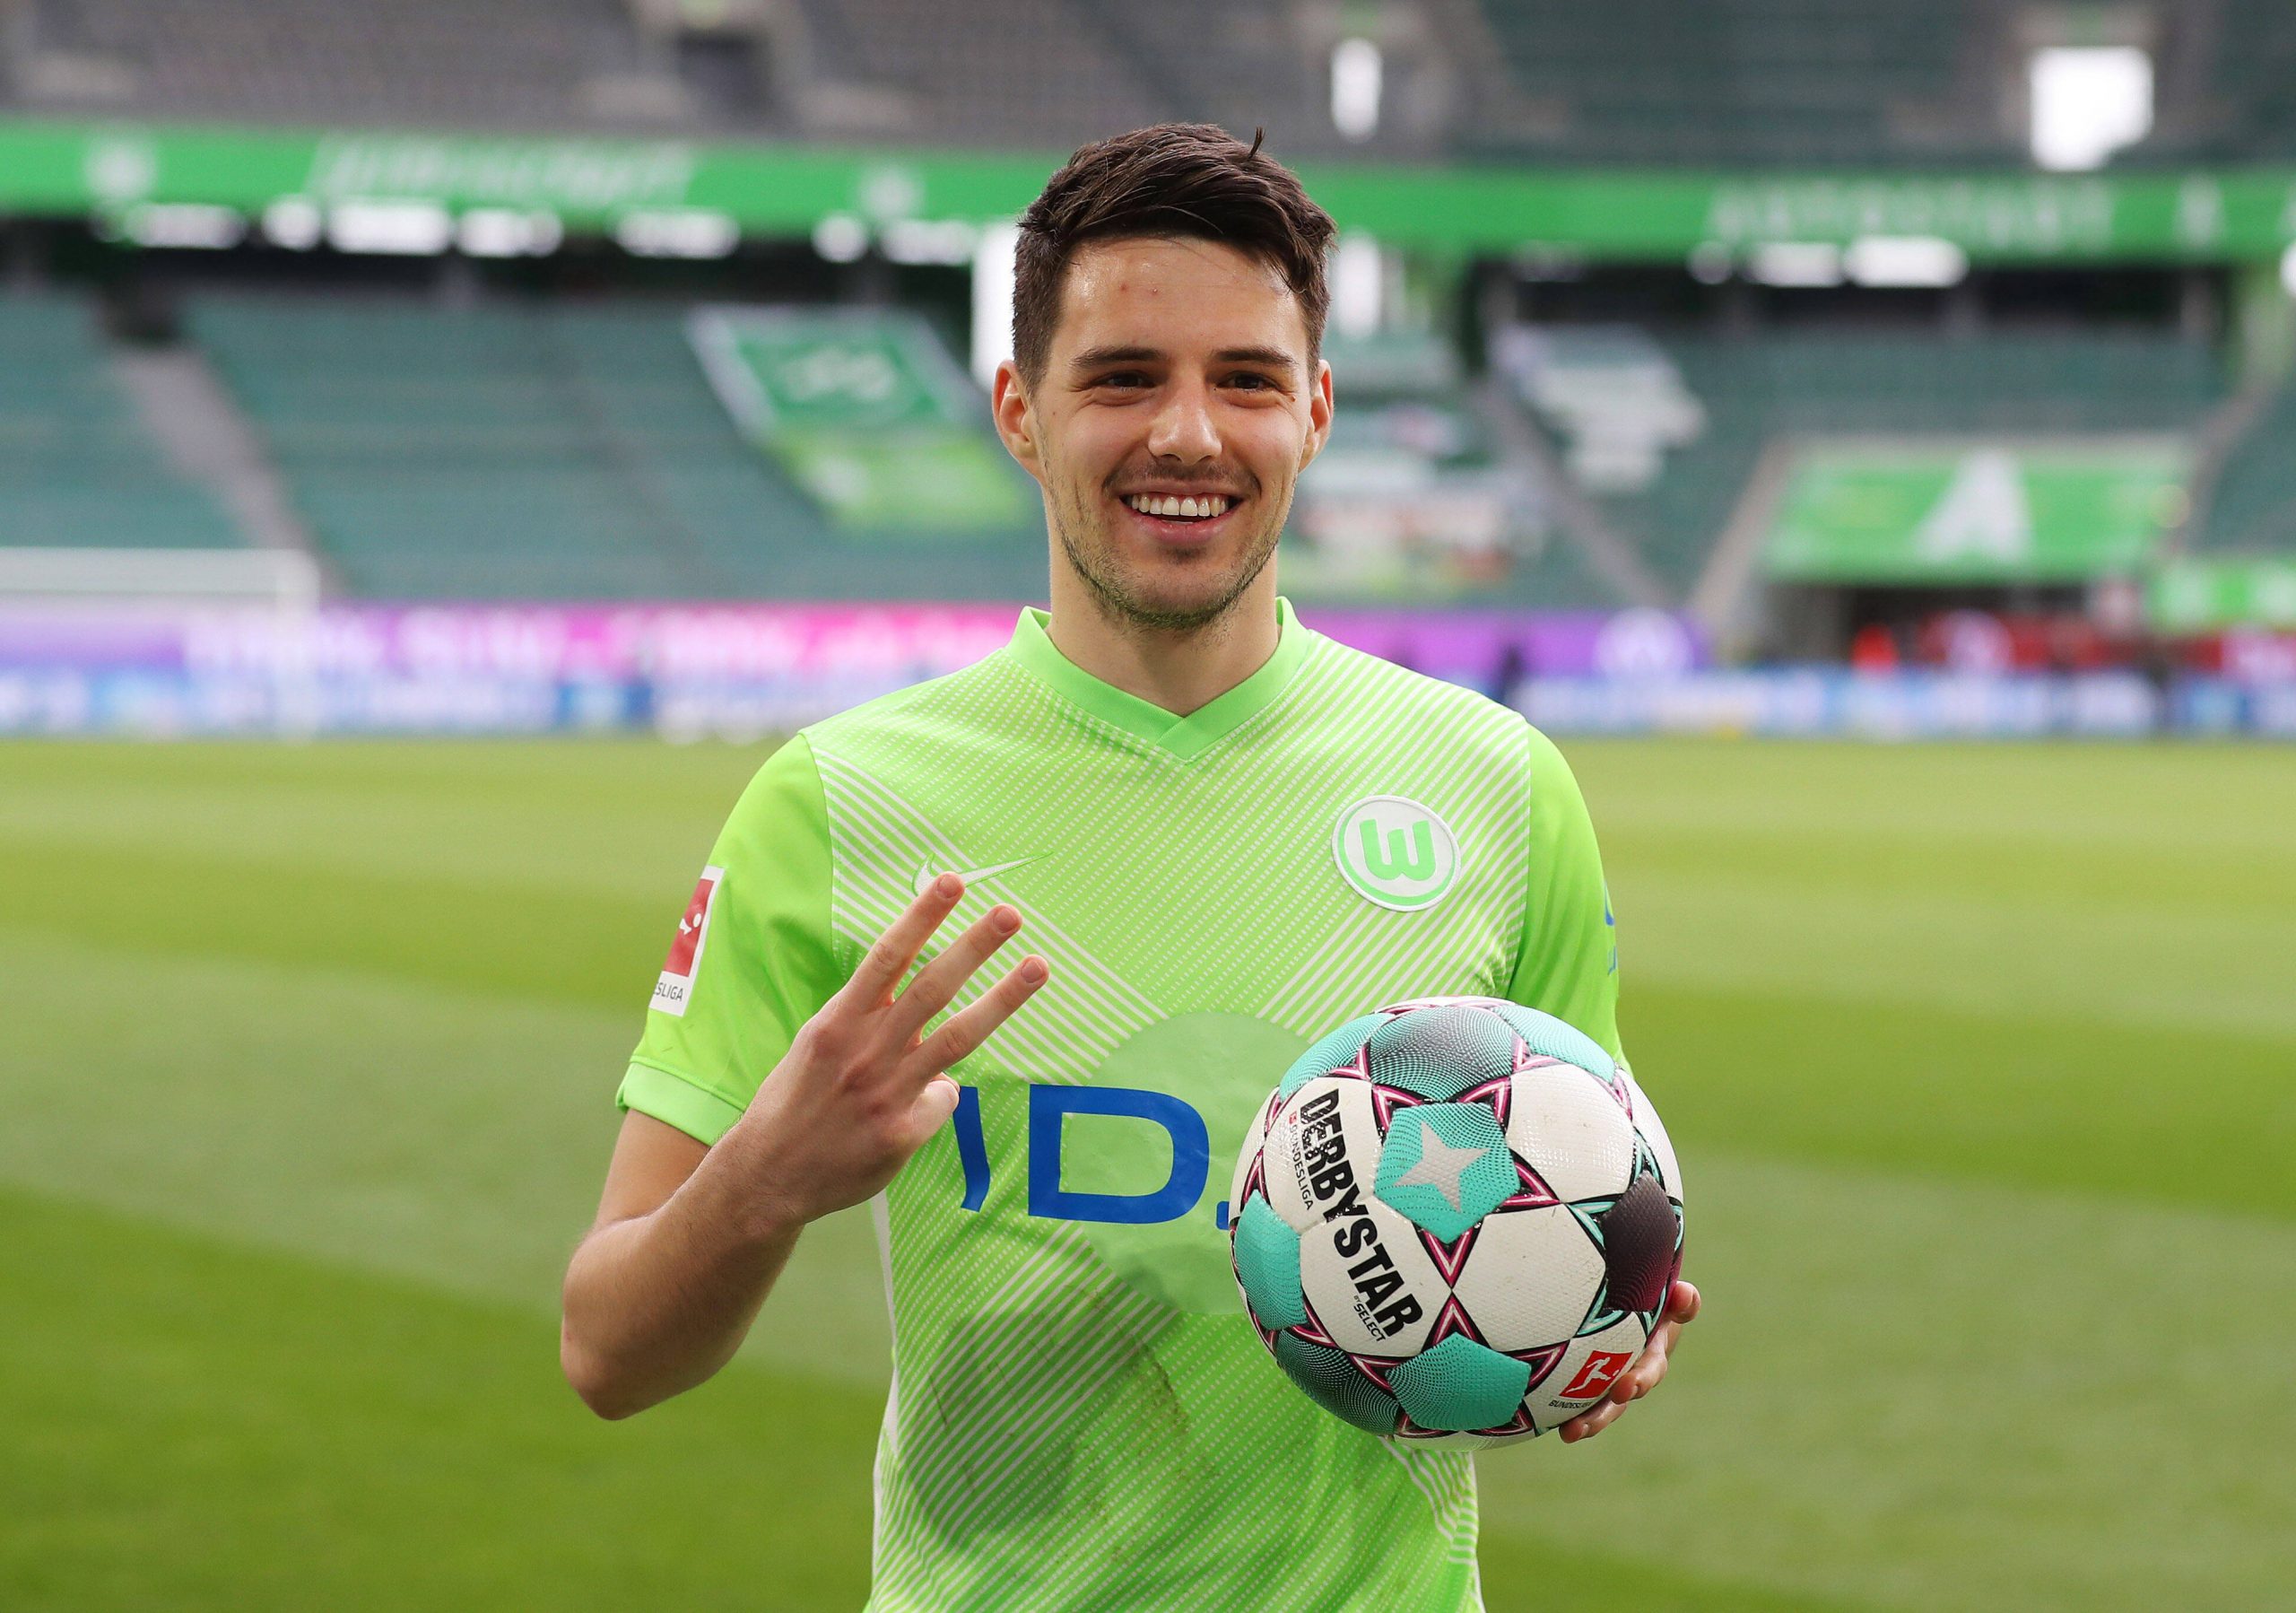 Josip Brekalo of Wolfsburg is linked with a transfer to Everton, Leeds United, and Napoli.